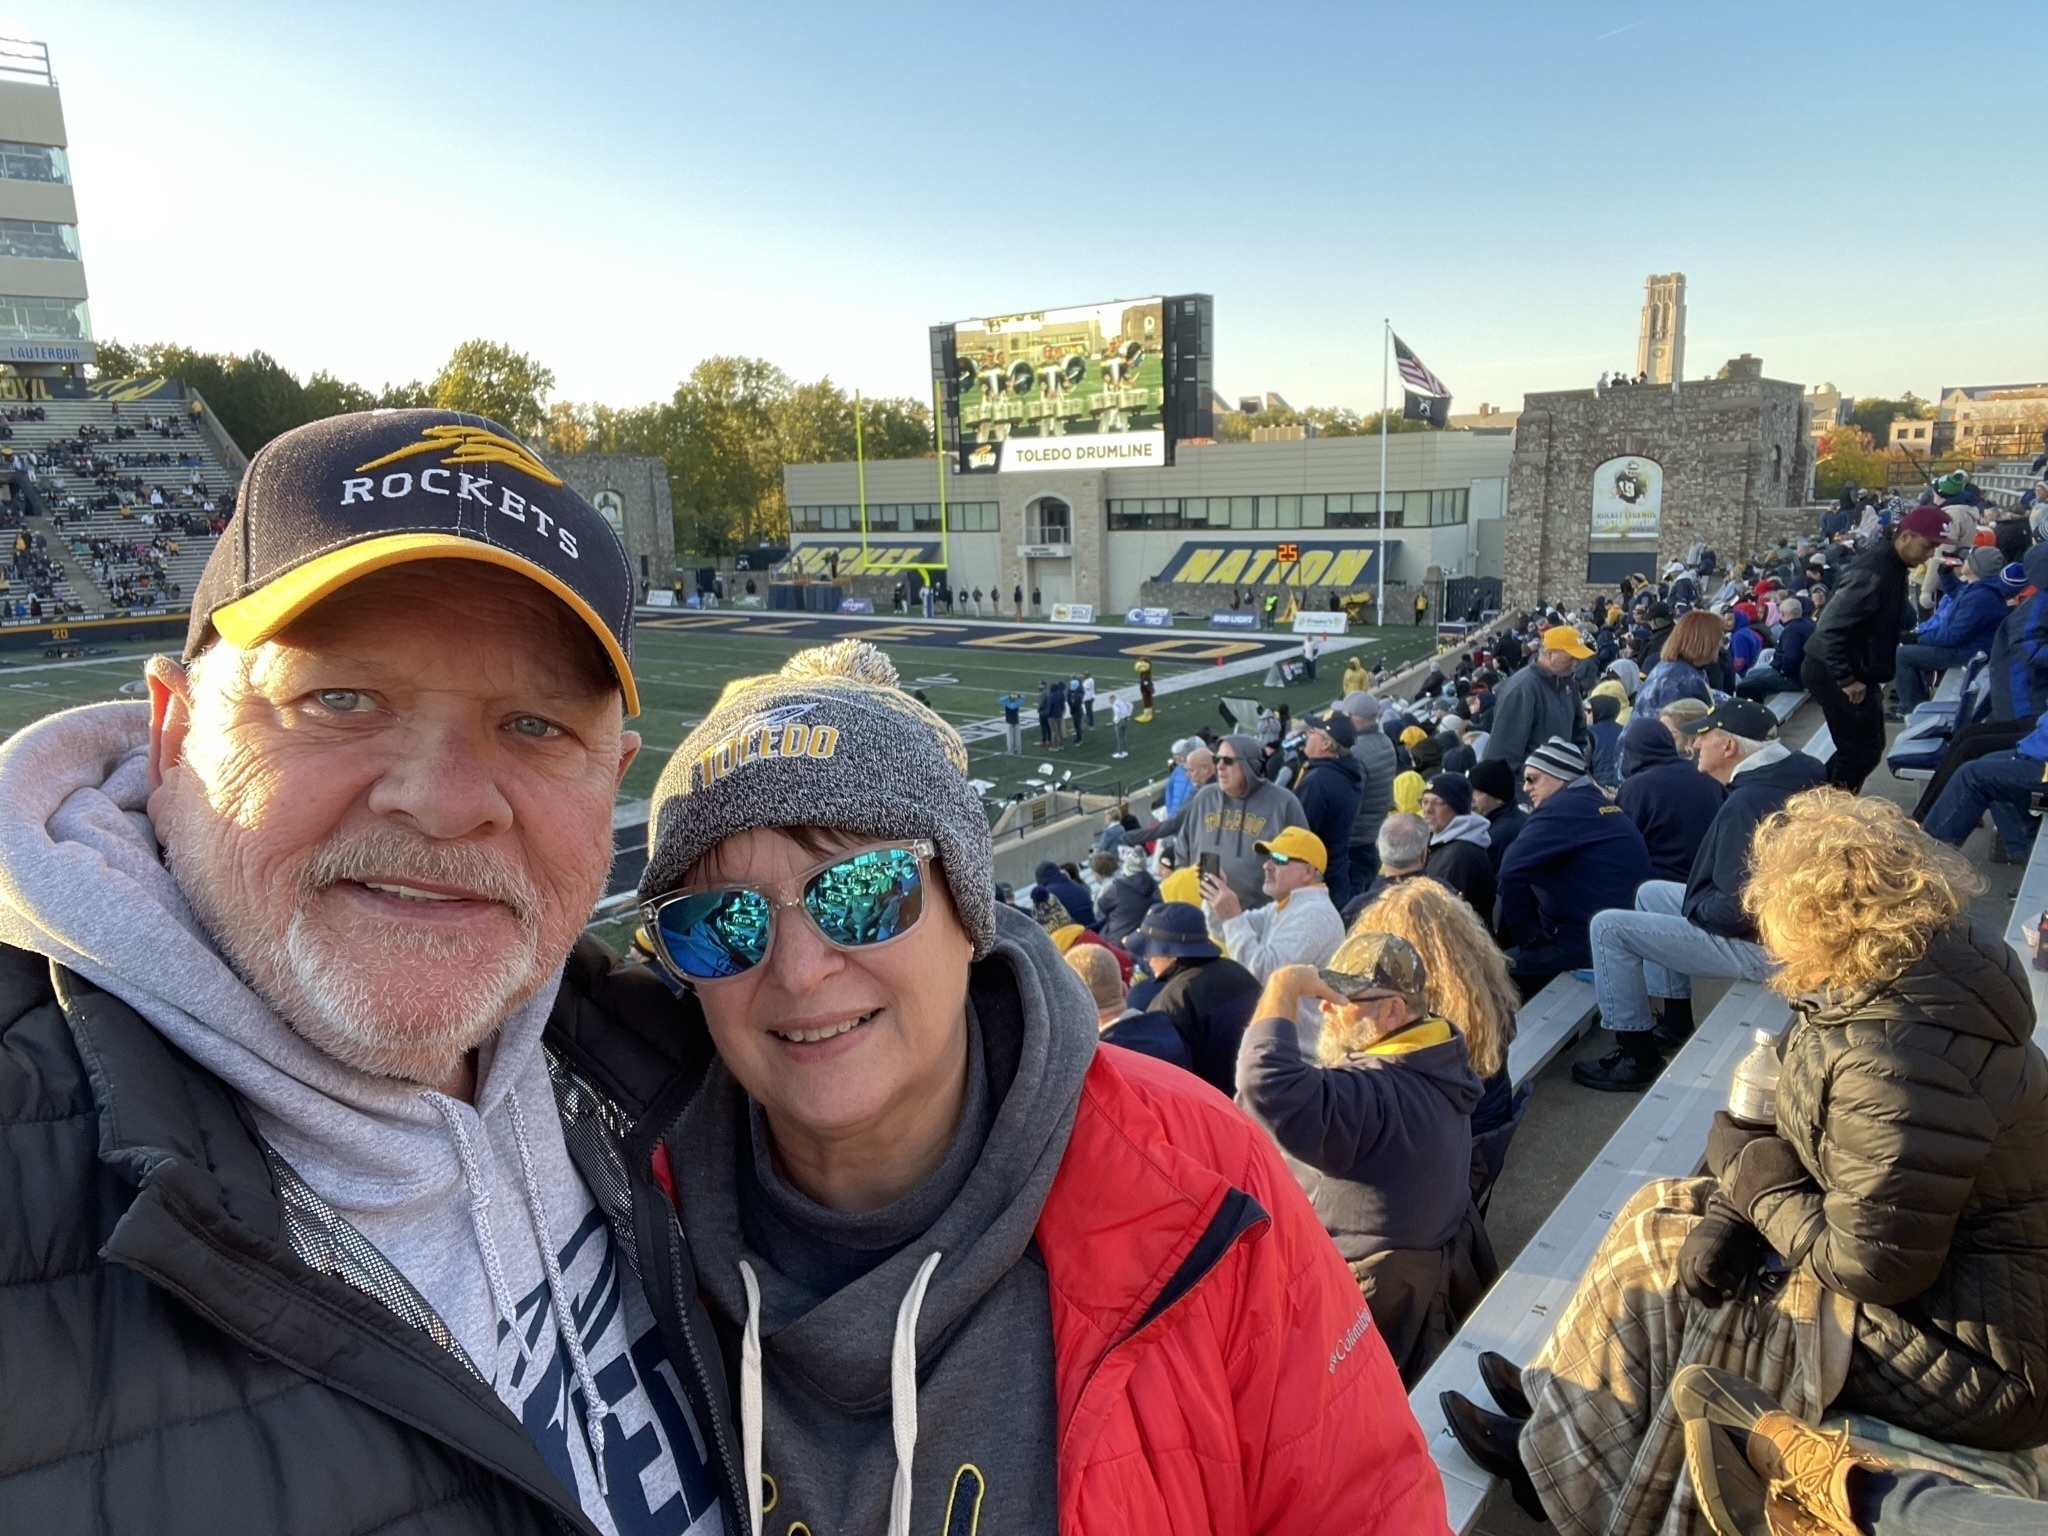 Kent State Golden Flashes vs. Toledo Rockets Football: Game Time